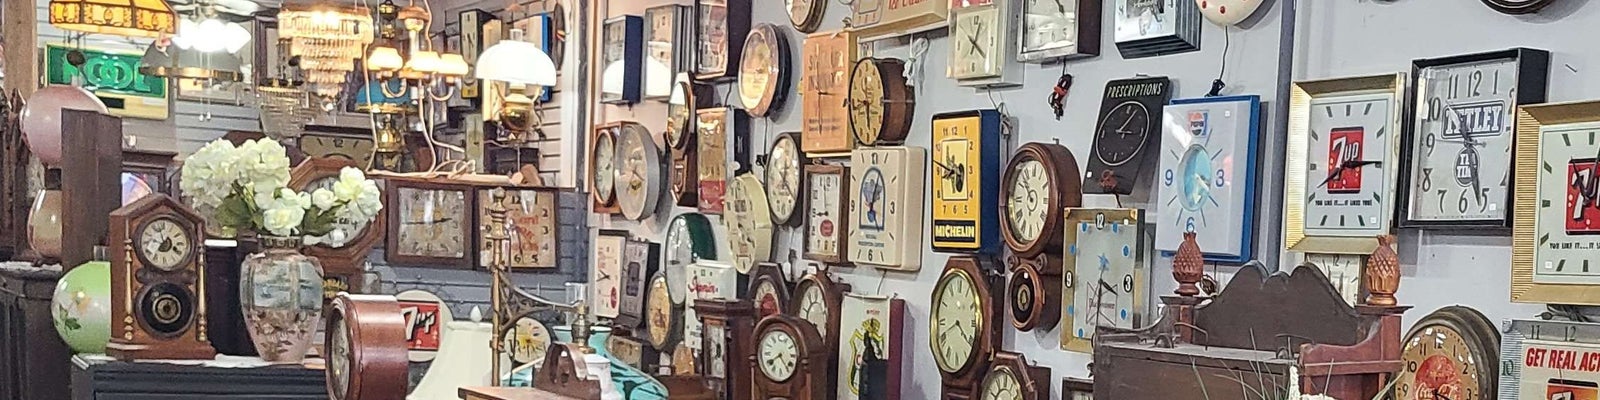 Patrick's Antiques and Auctions